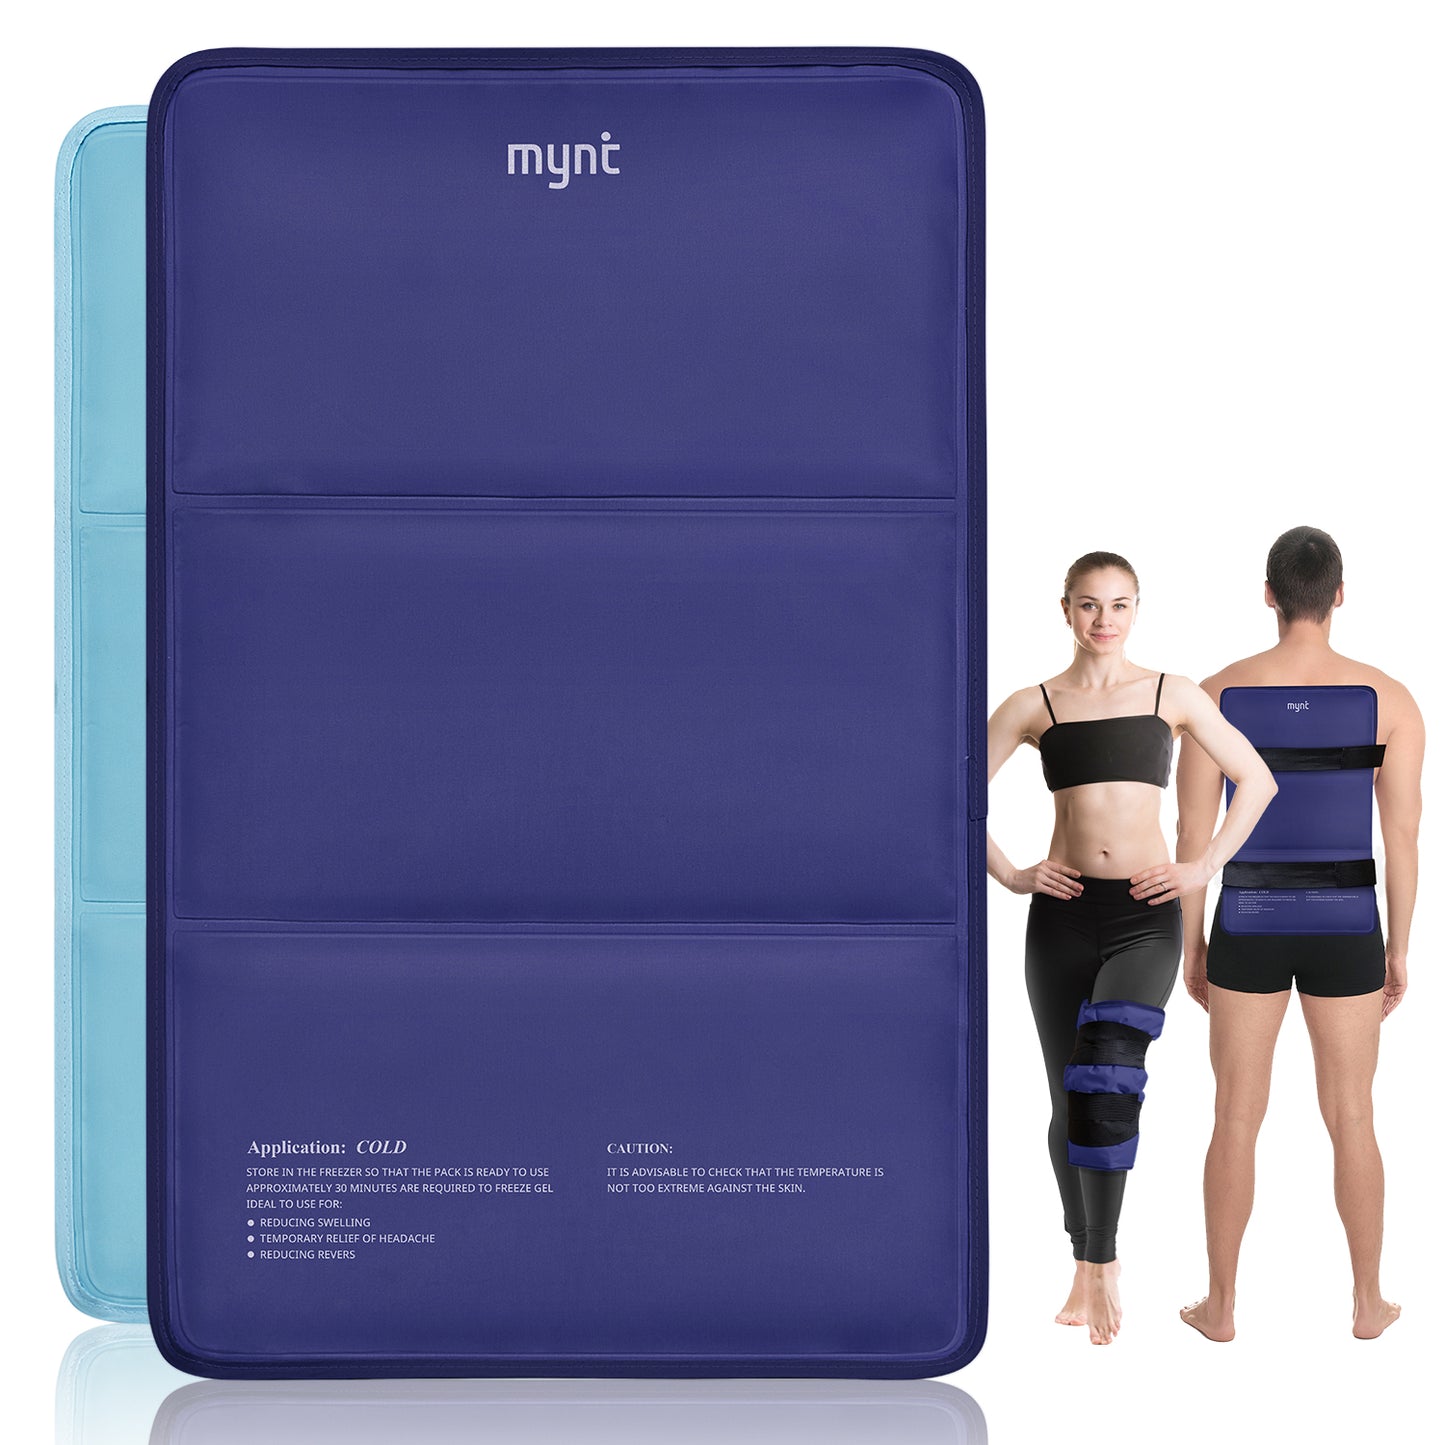 Mynt Reusable Gel Ice Pack with Large Size of 21''x13'' and 2 Adjustable Straps for Neck Shoulder Back Waist Leg Knee Ankle Injuries(Navy Blue)